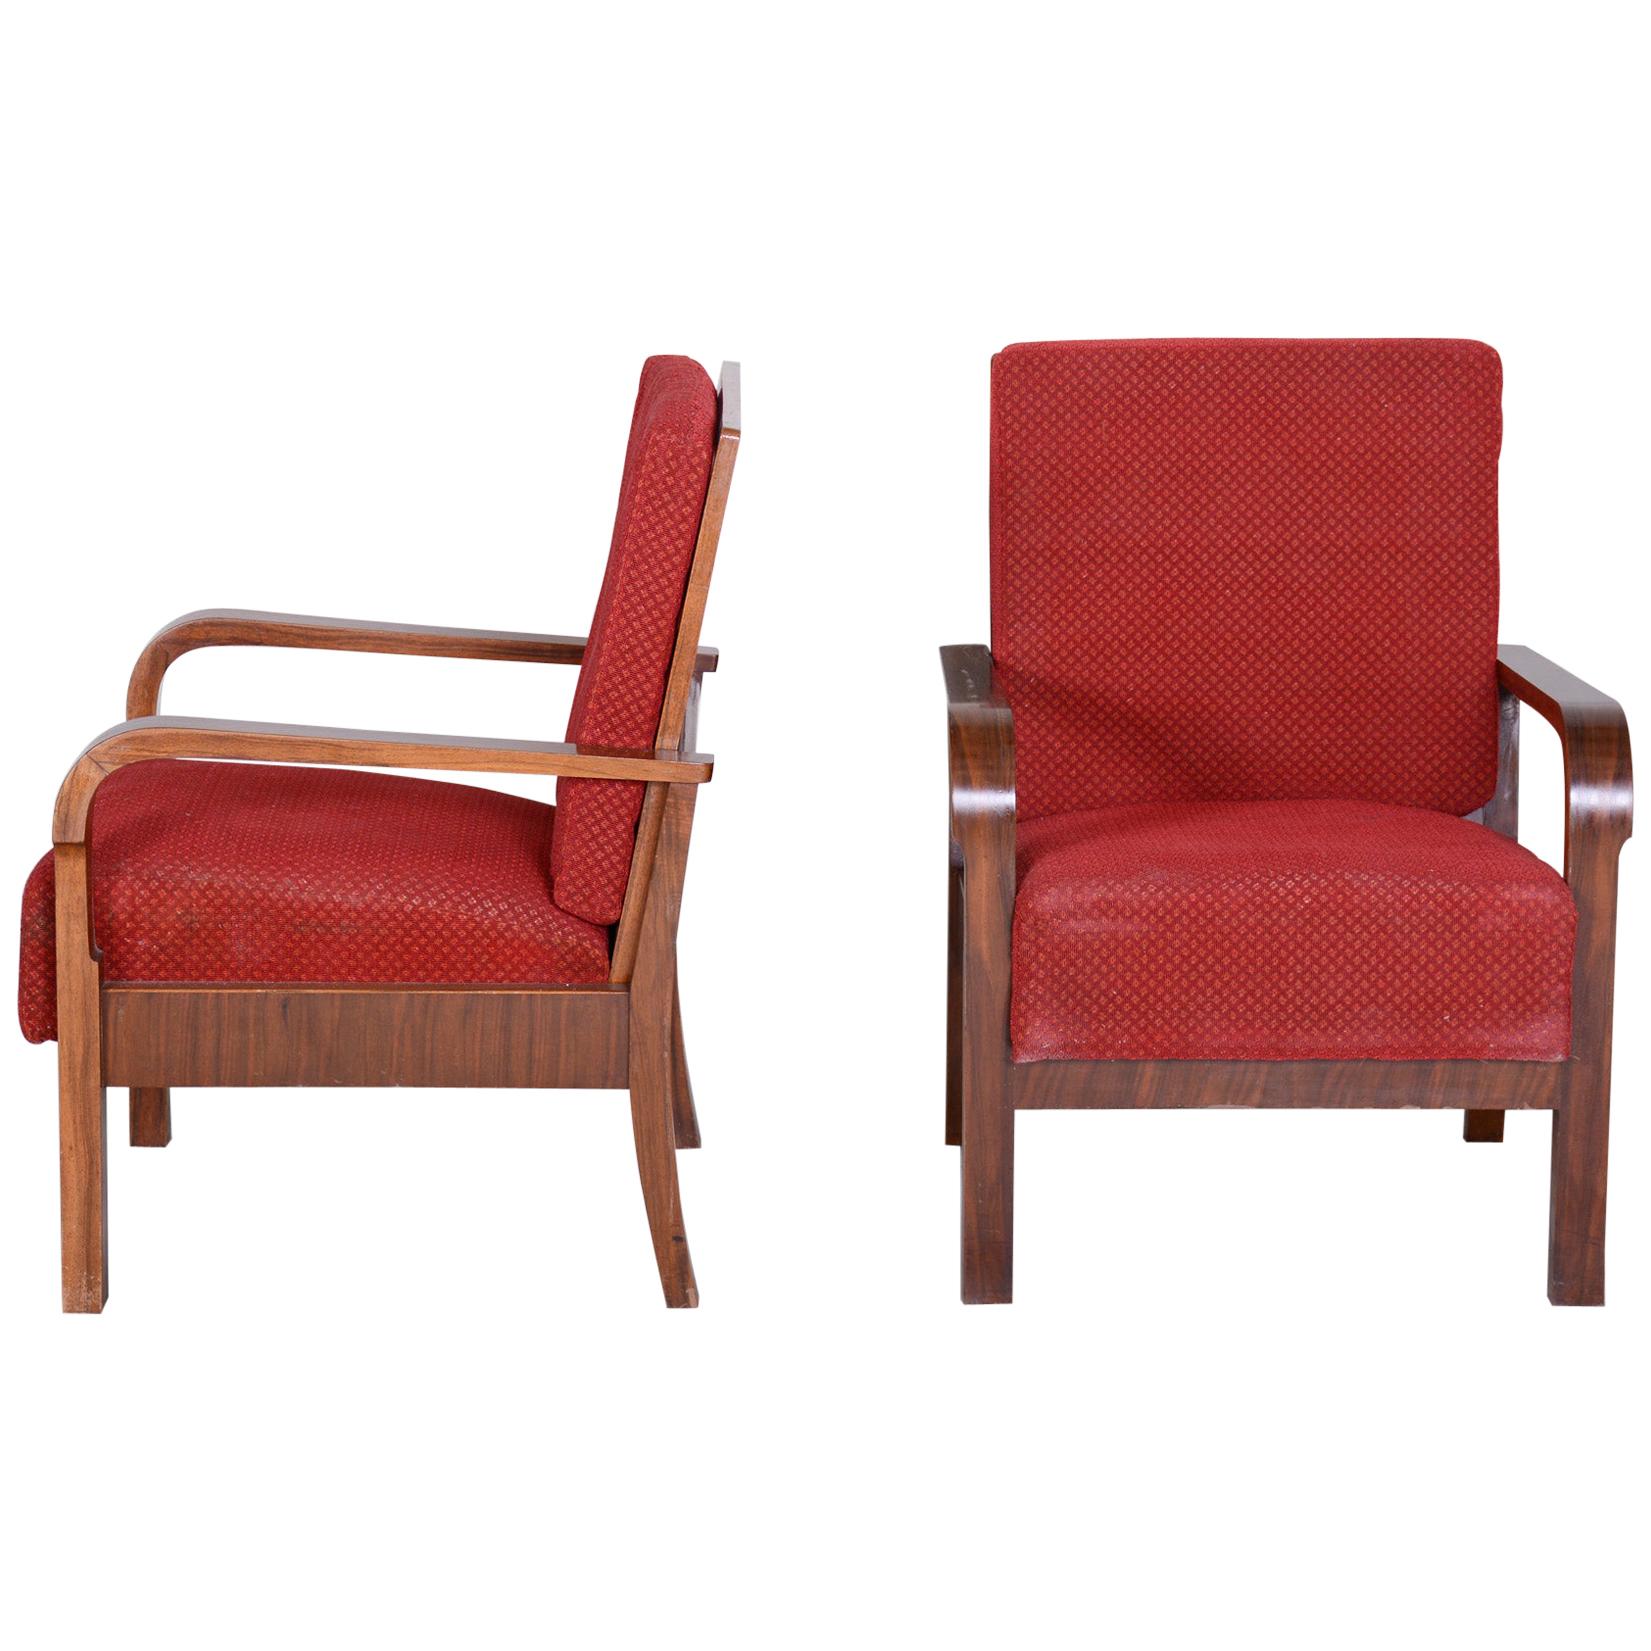 Pair of Walnut Positioning Armchairs, Original upholstery, Restored wood, 1930s For Sale